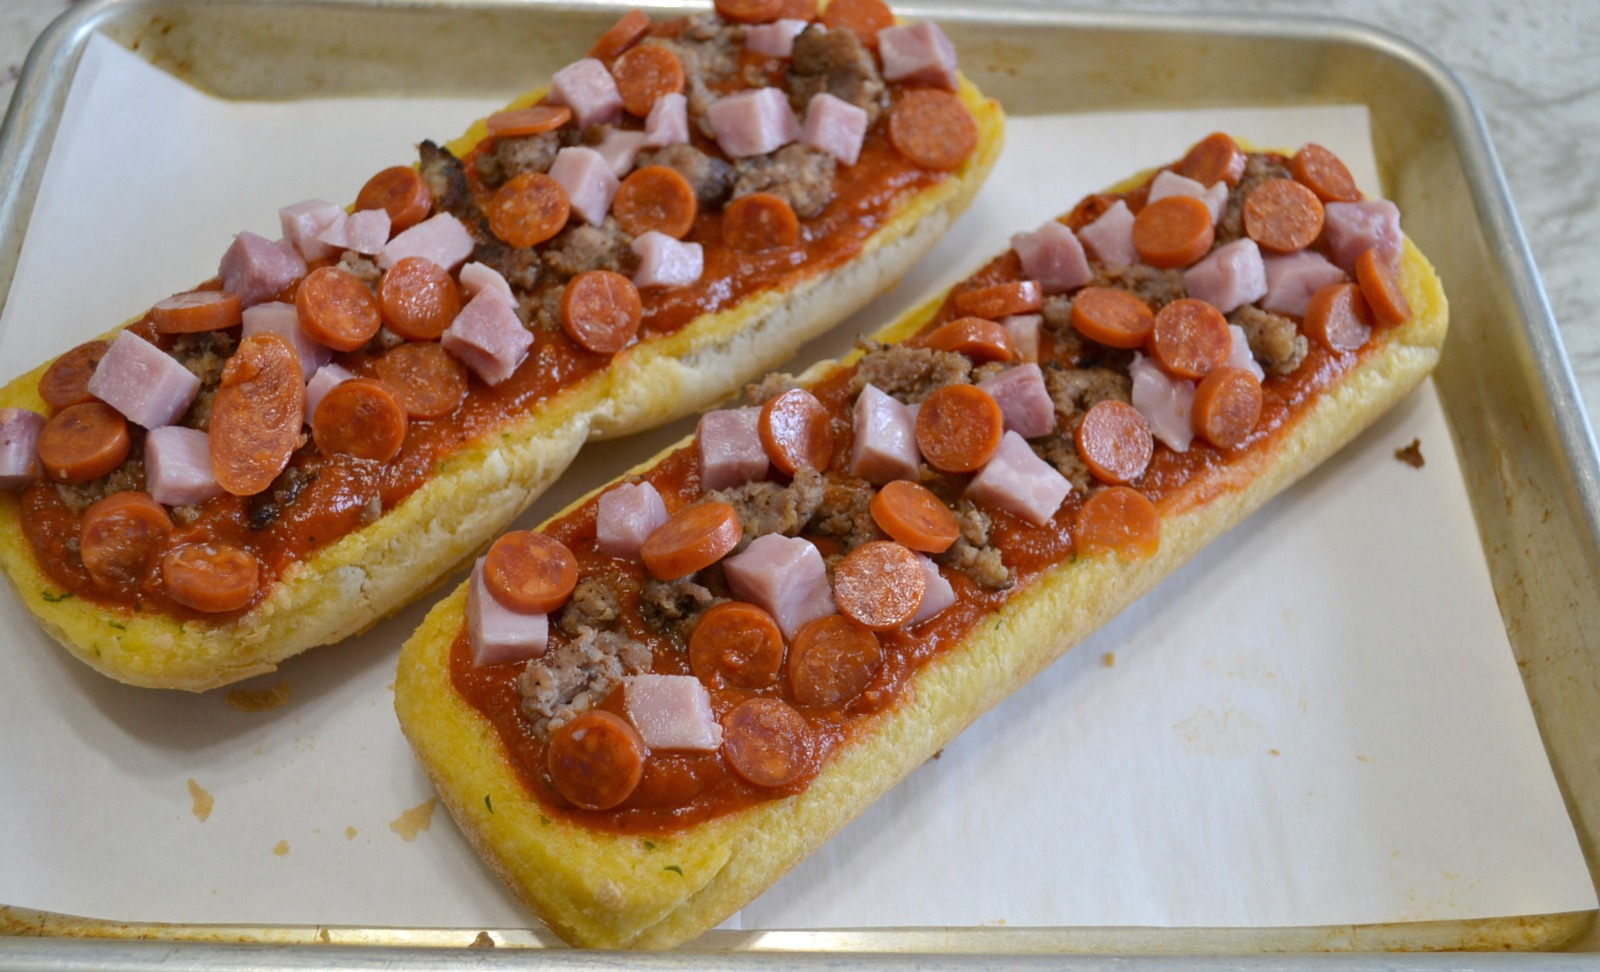 A quick and easy pizza made on a loaf of garlic bread. Add your favorite toppings and cheese for a great snack or lunch.